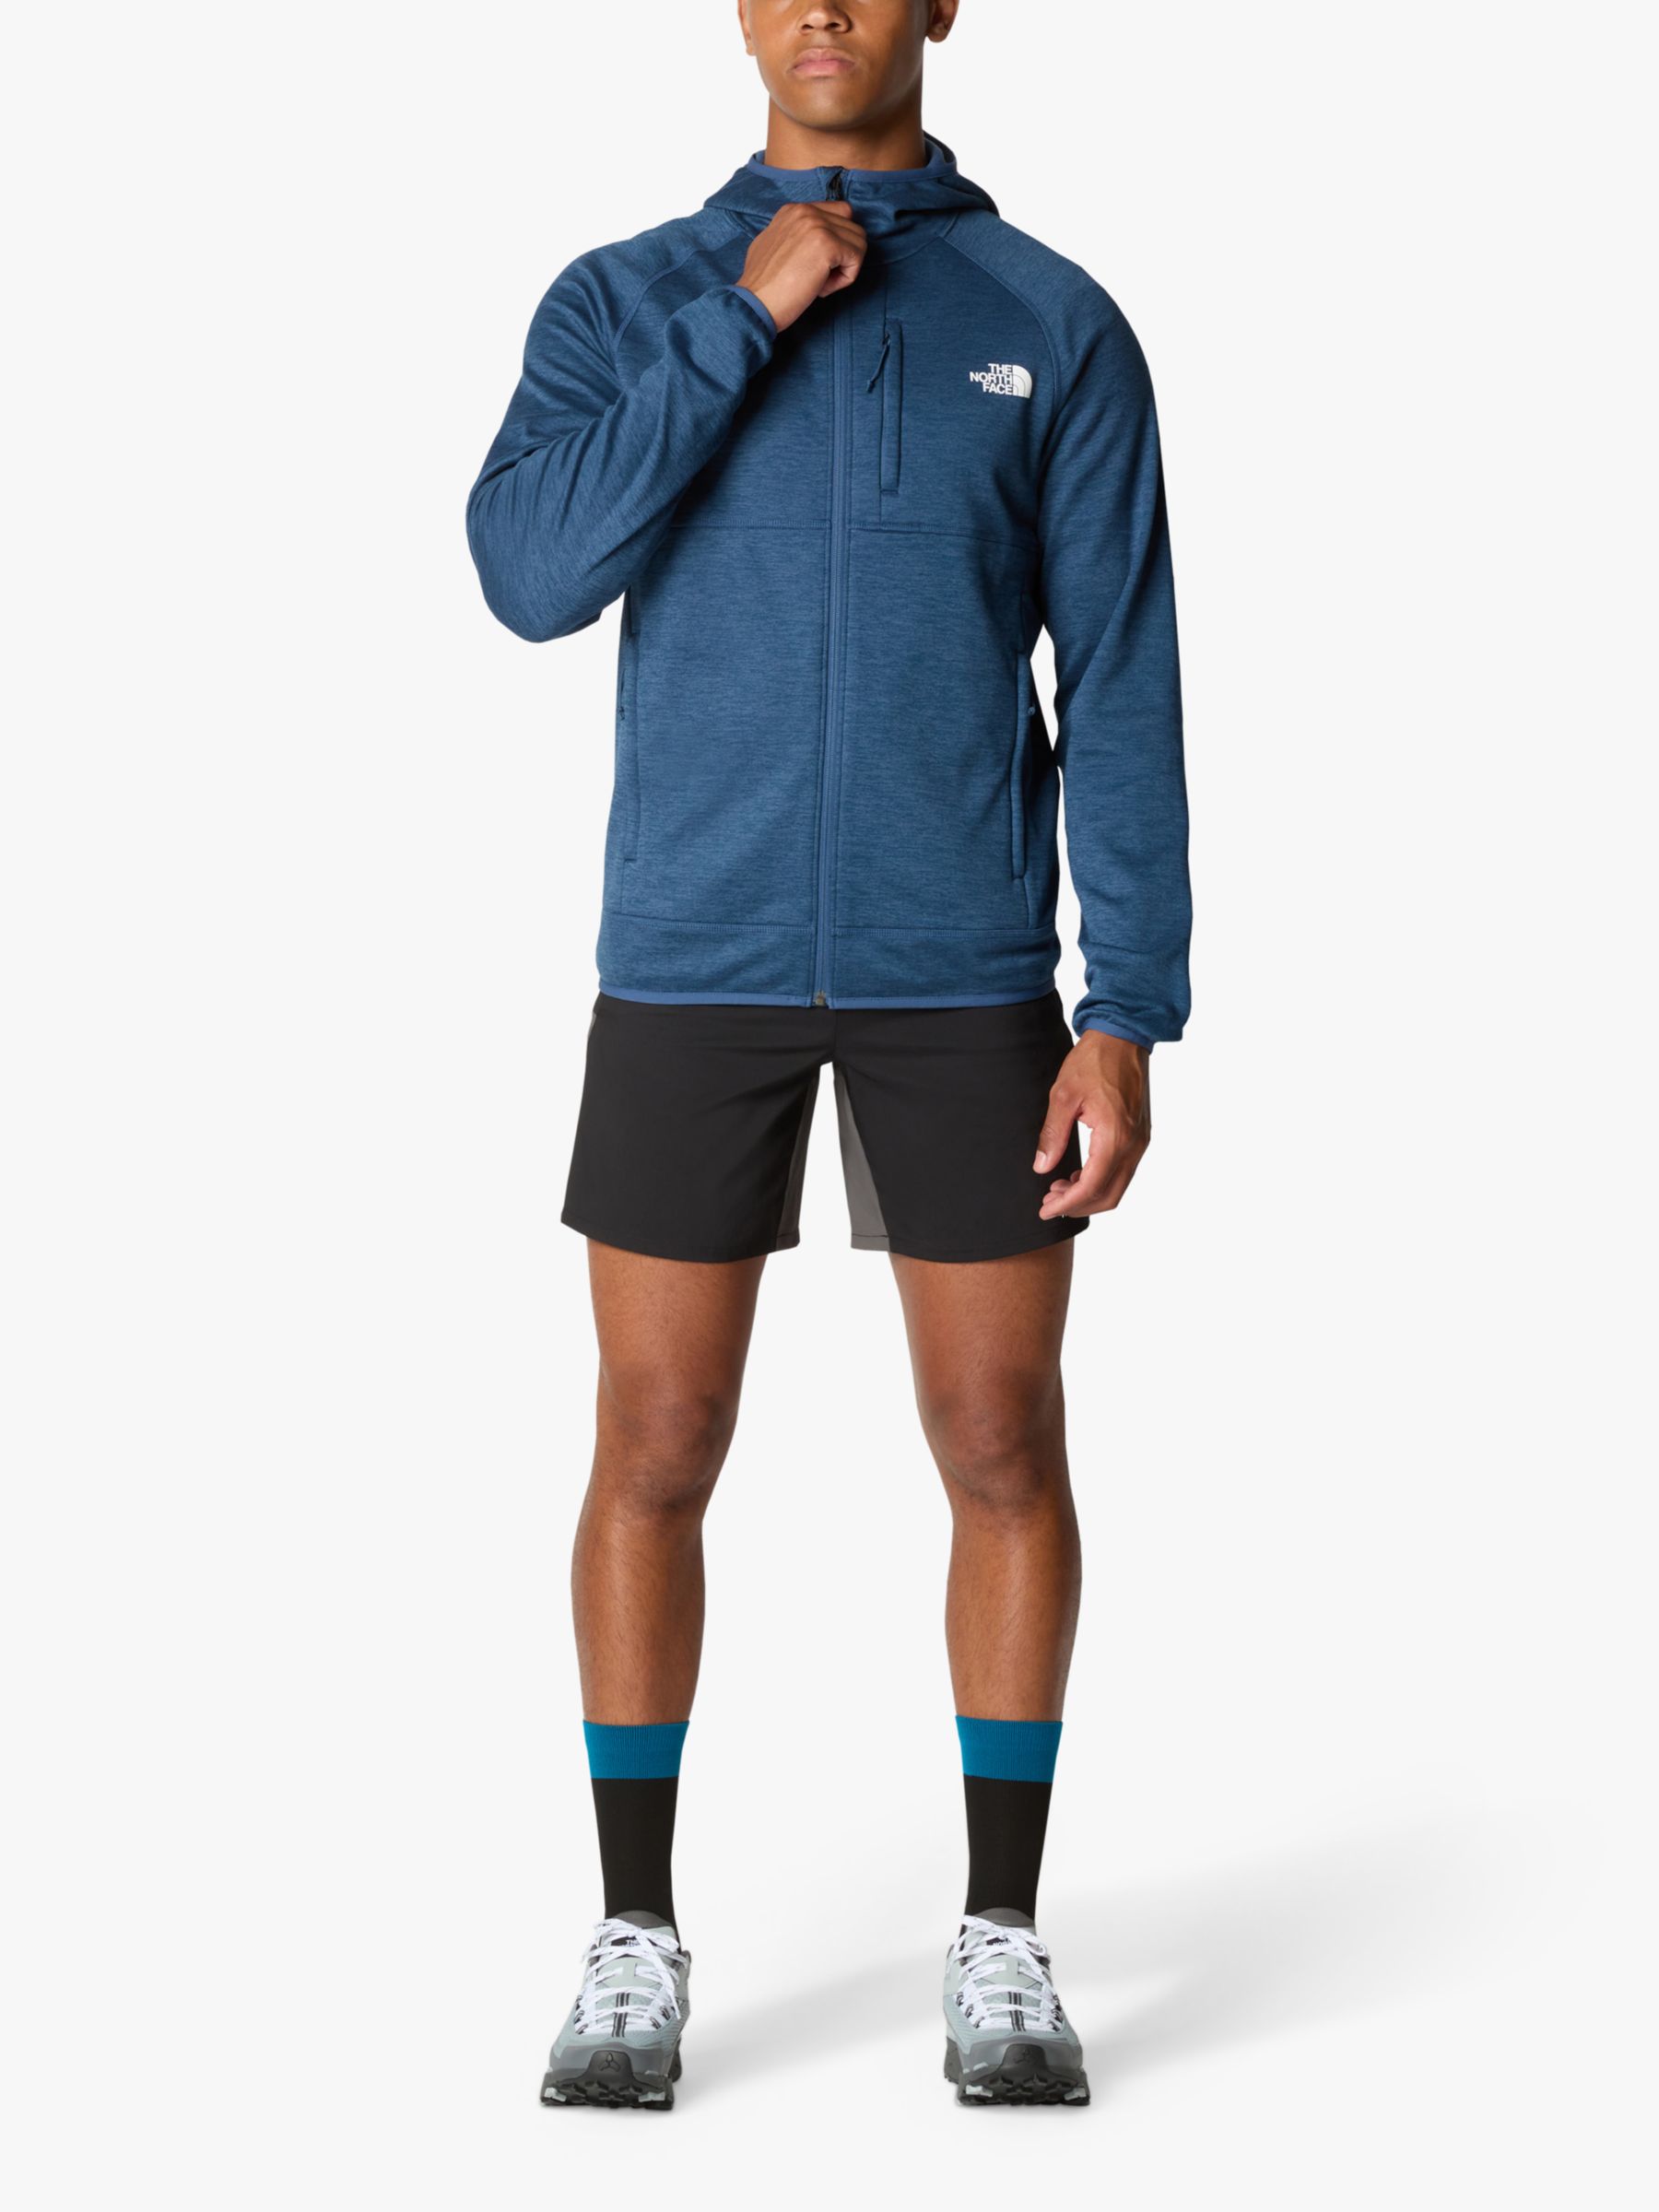 Buy The North Face Canyonlands Hooded Fleece Jacket, Blue Heather Online at johnlewis.com